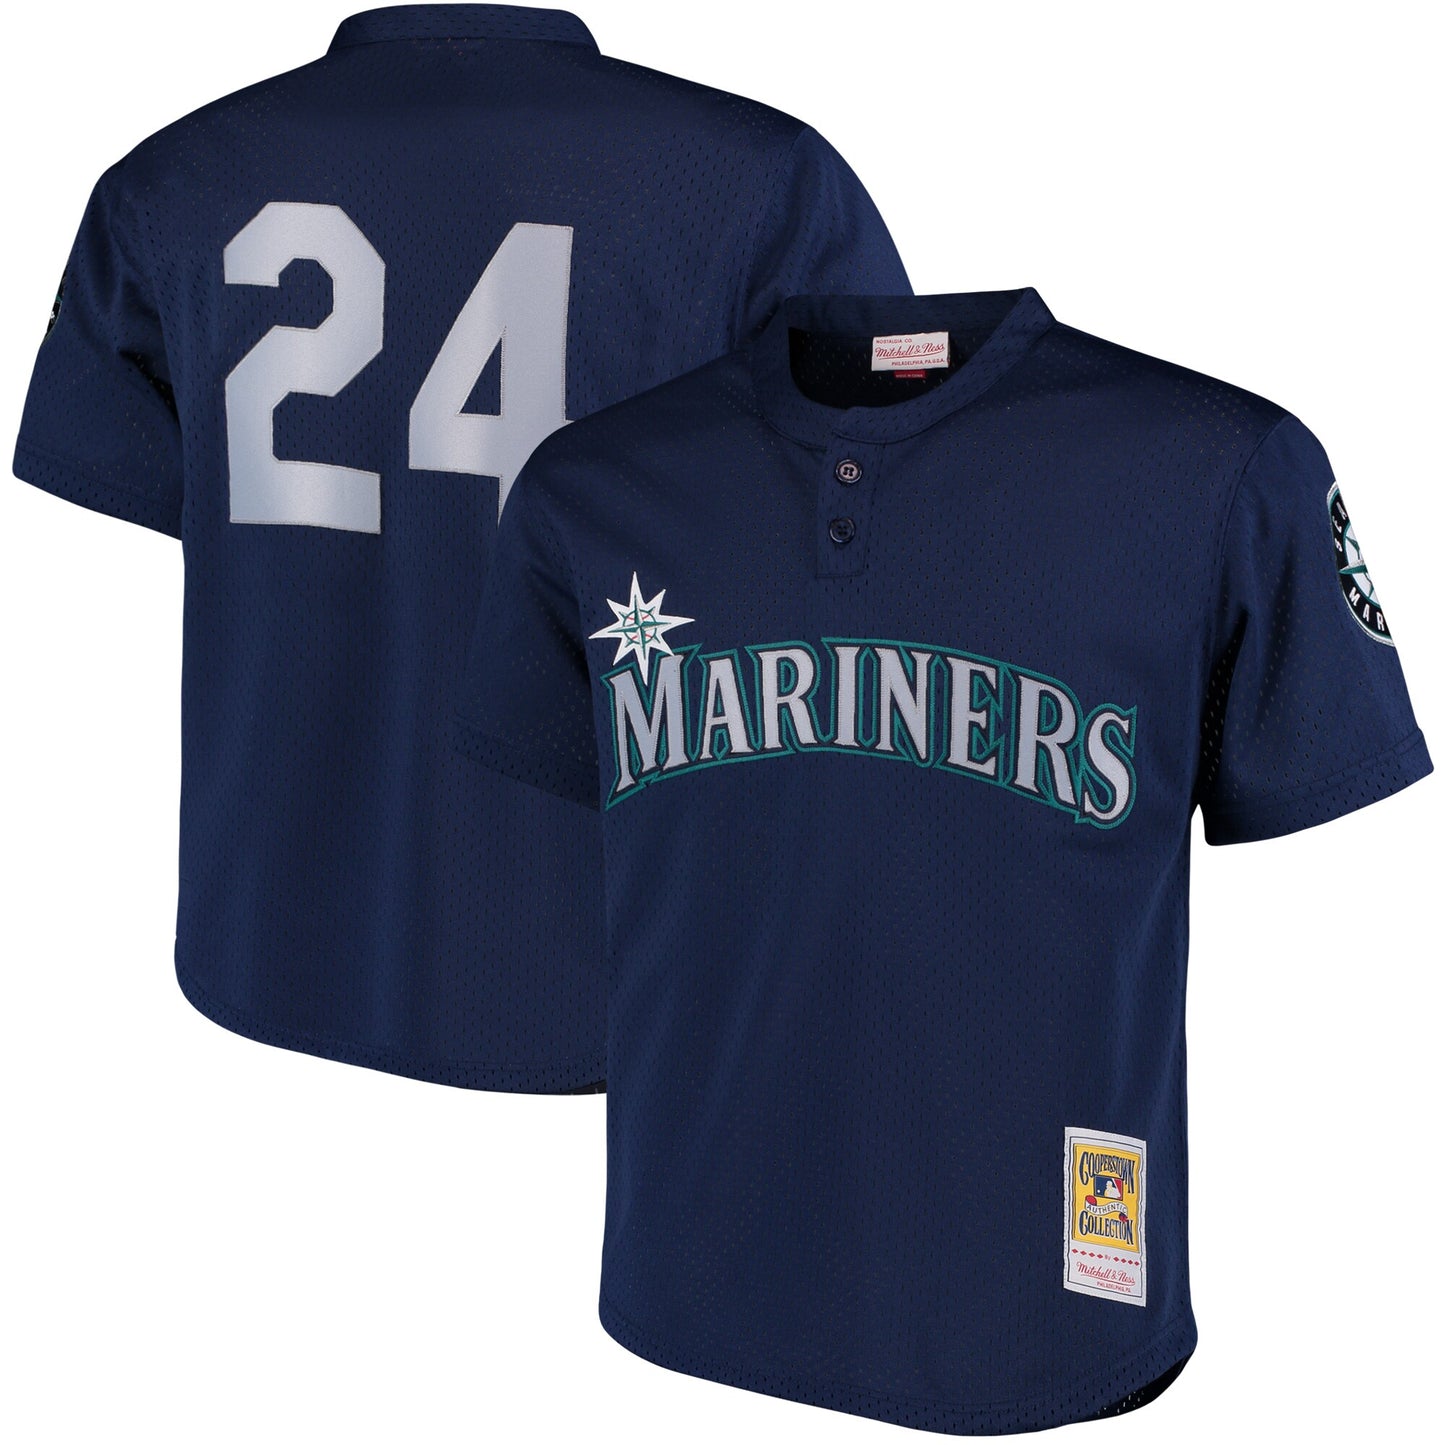 Ken Griffey Jr. Seattle Mariners Mitchell & Ness Cooperstown Collection Mesh Batting Practice Jersey - Navy